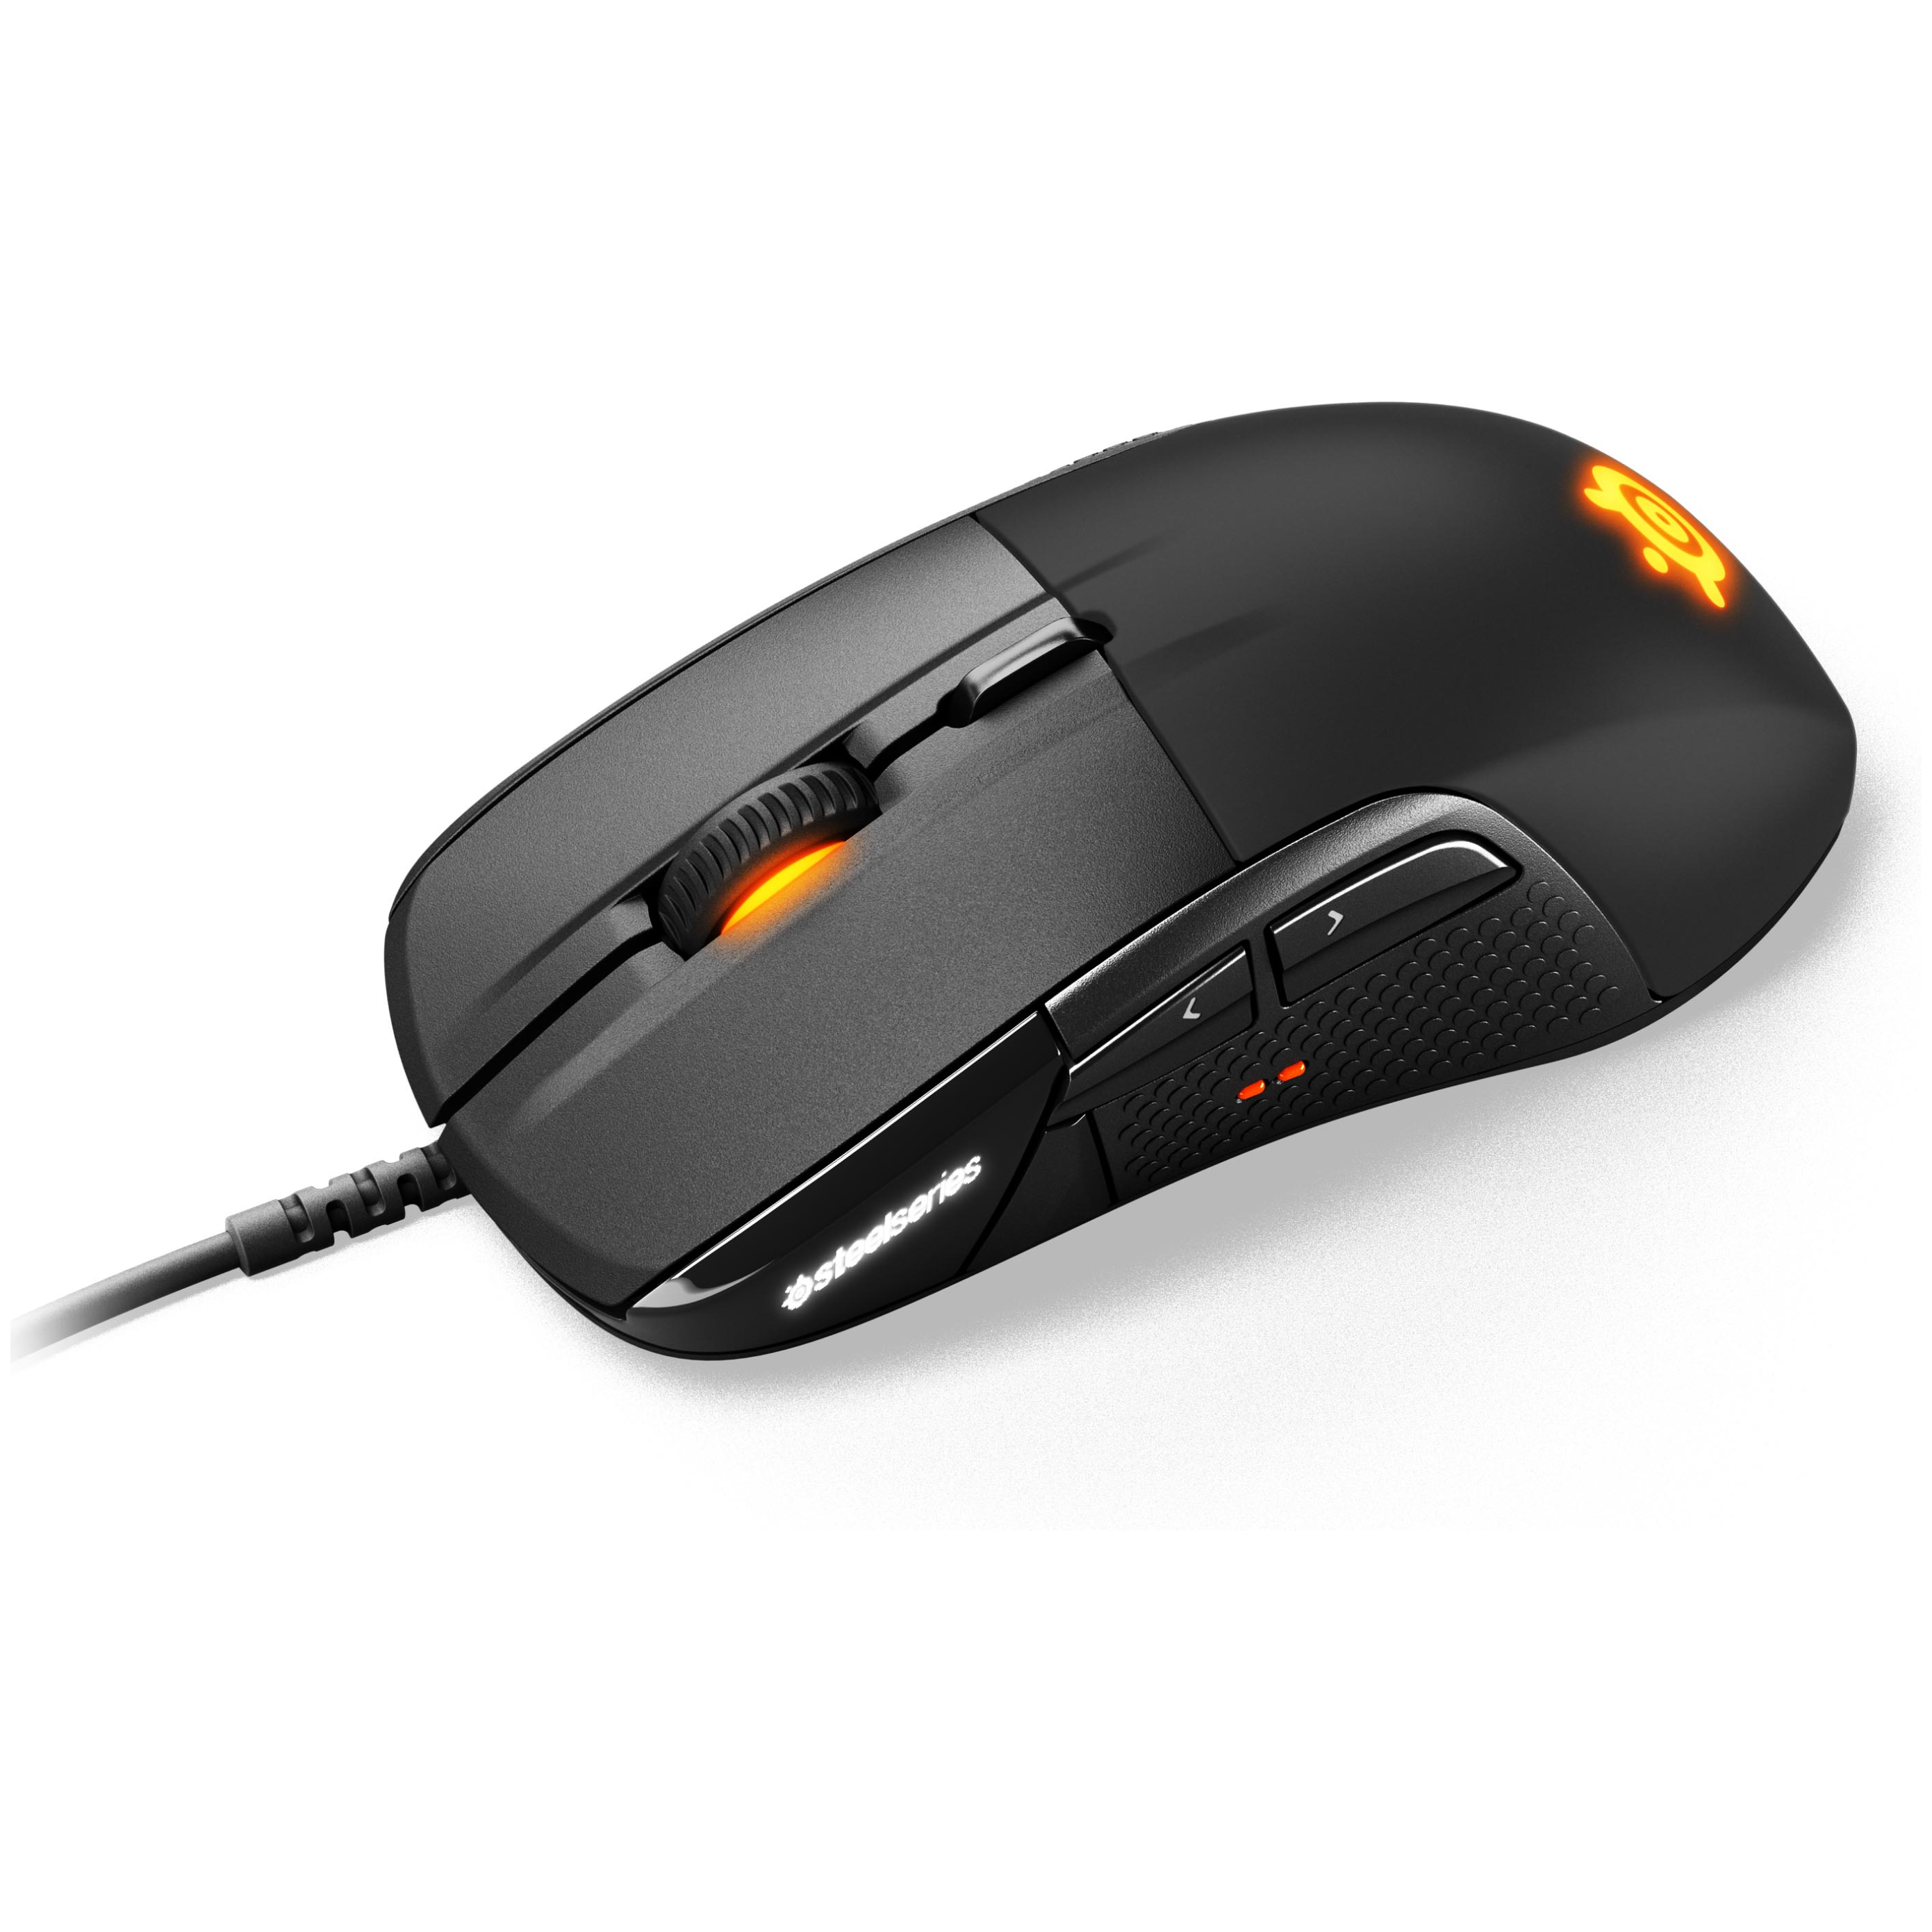 steelseries wow mouse dimensions